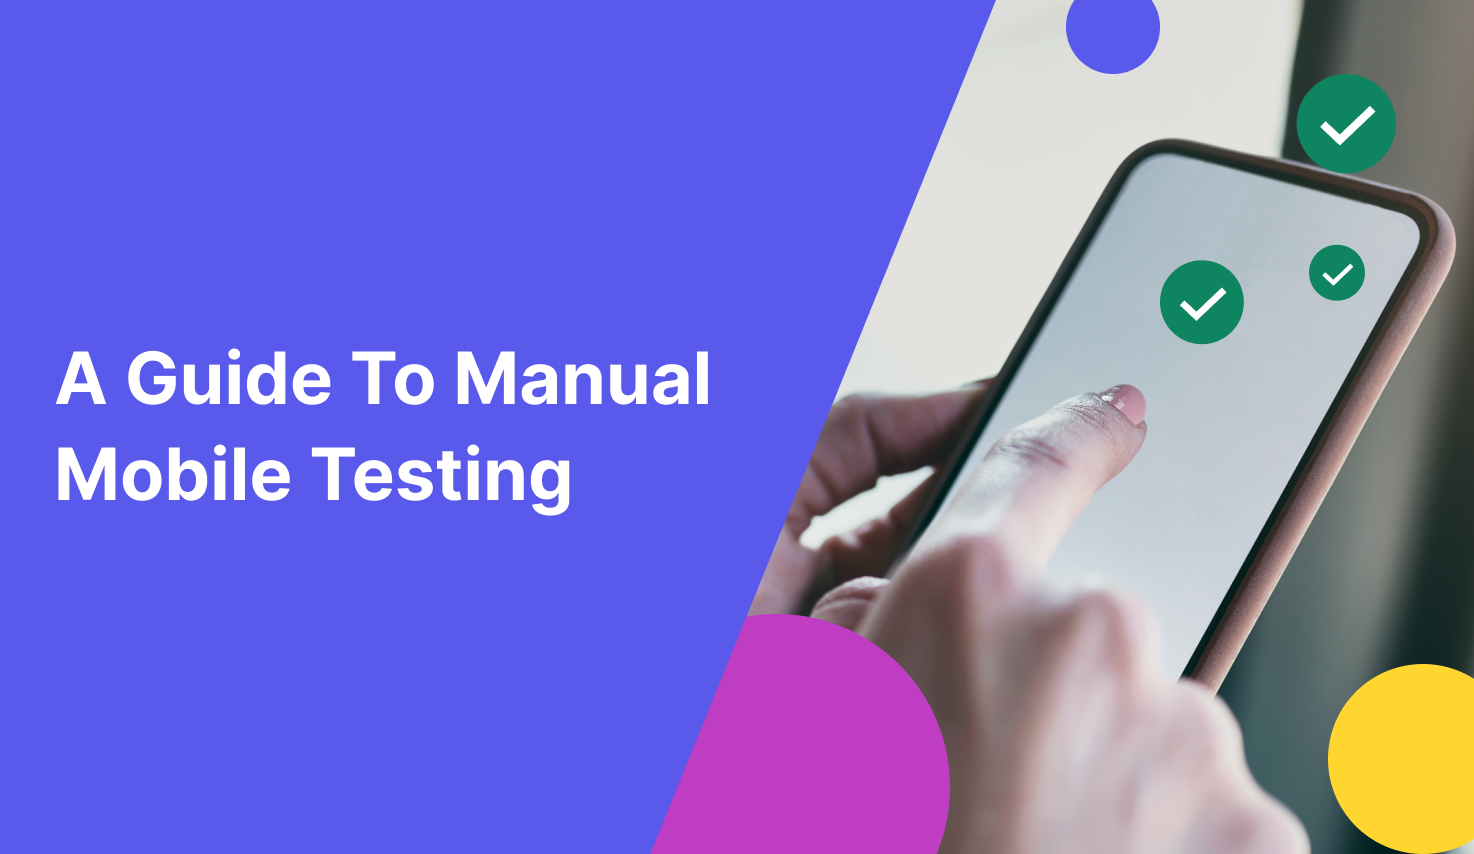 A Complete Guide To Manual mobile testing with Katalon featured image